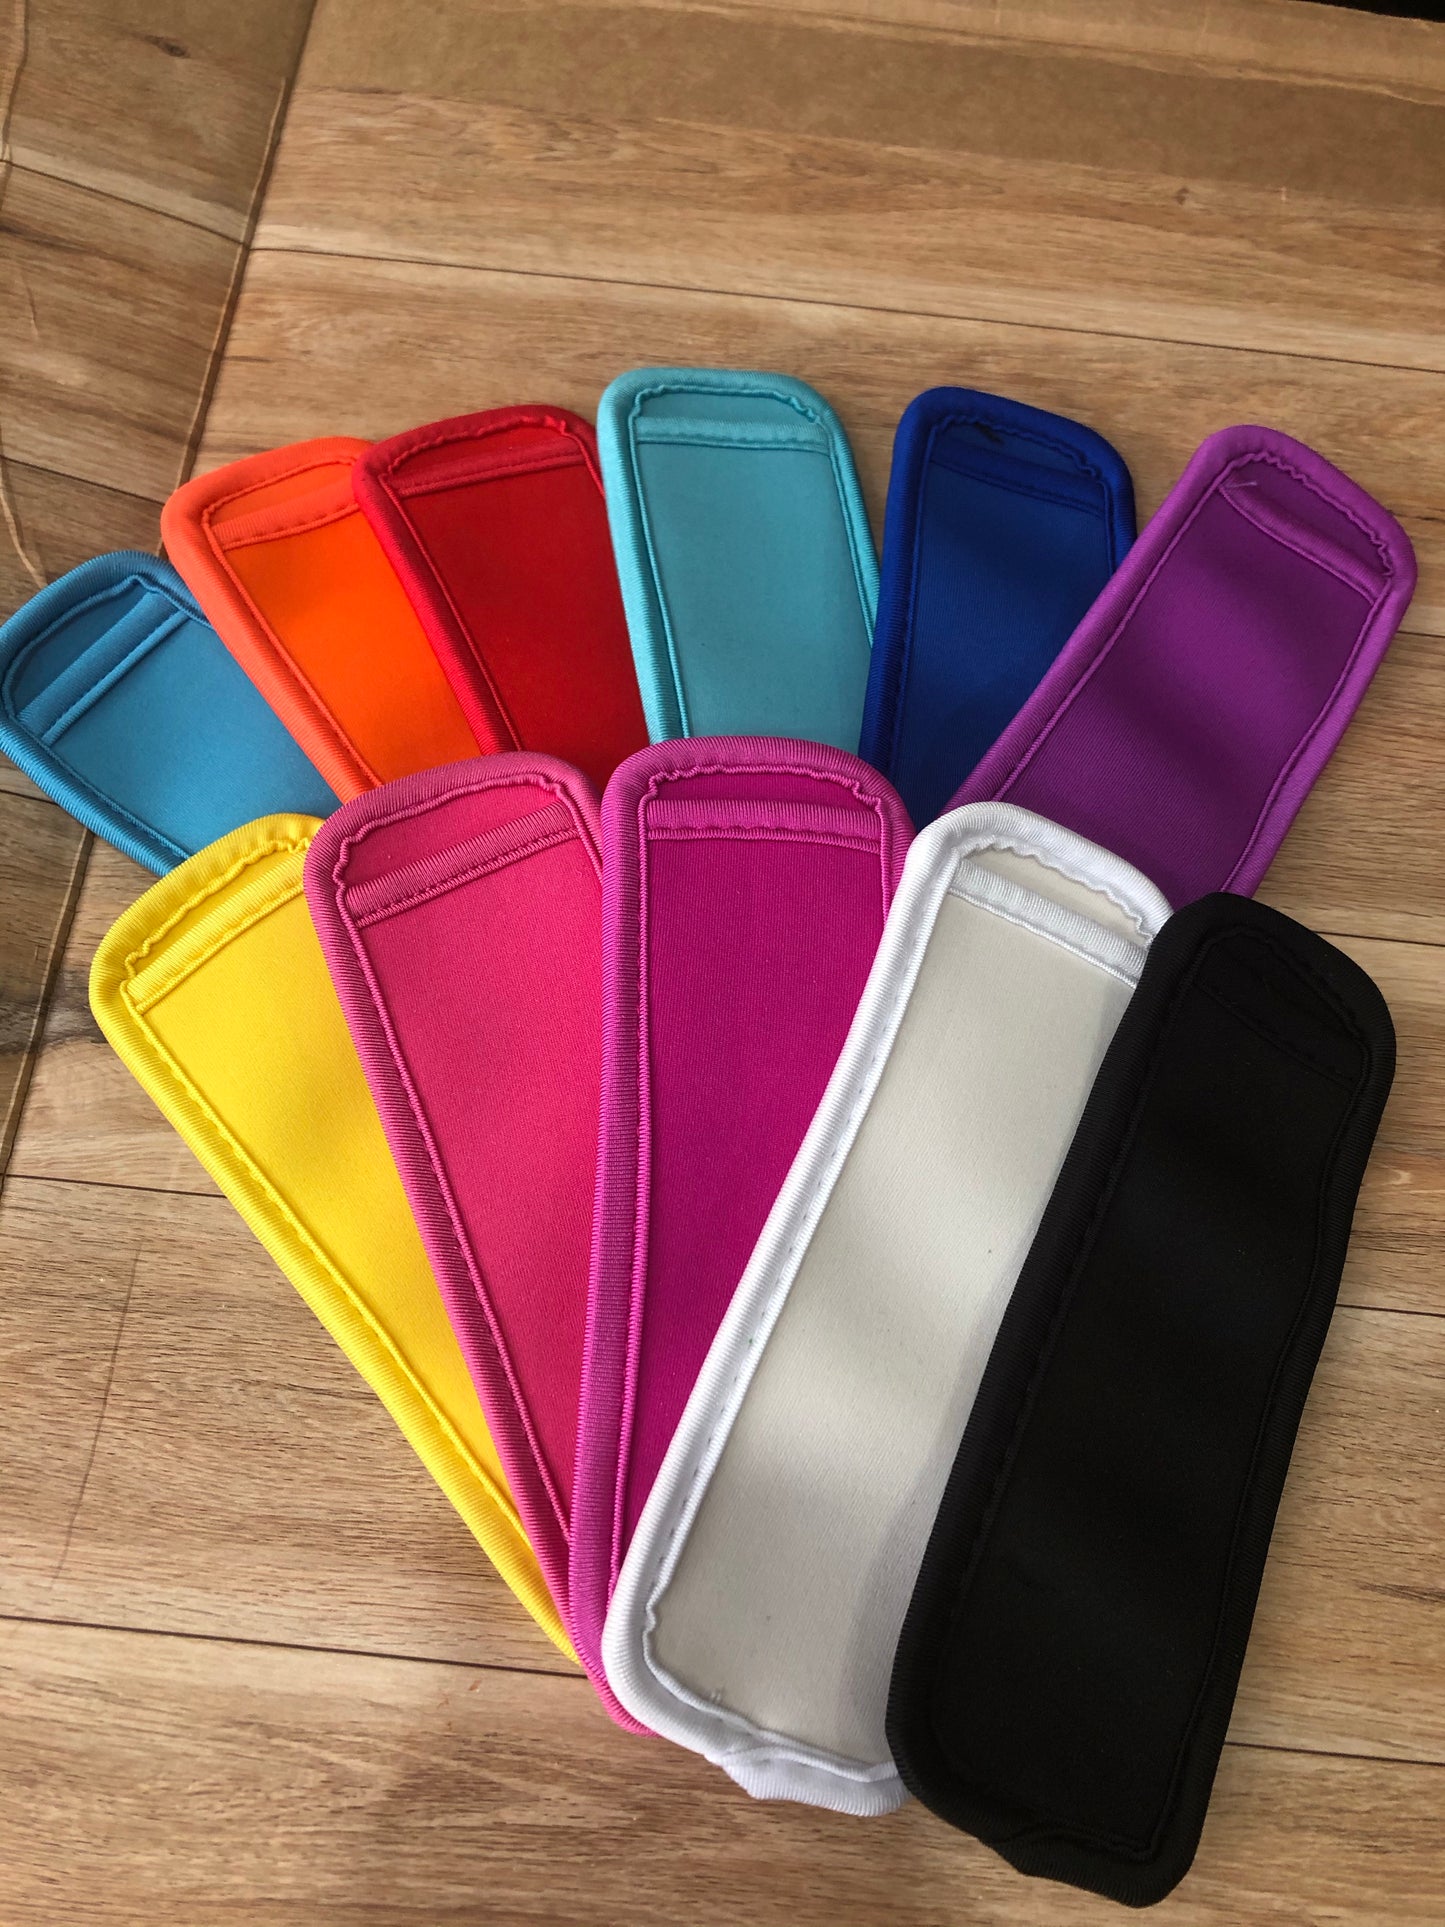 Solid color freezie holders